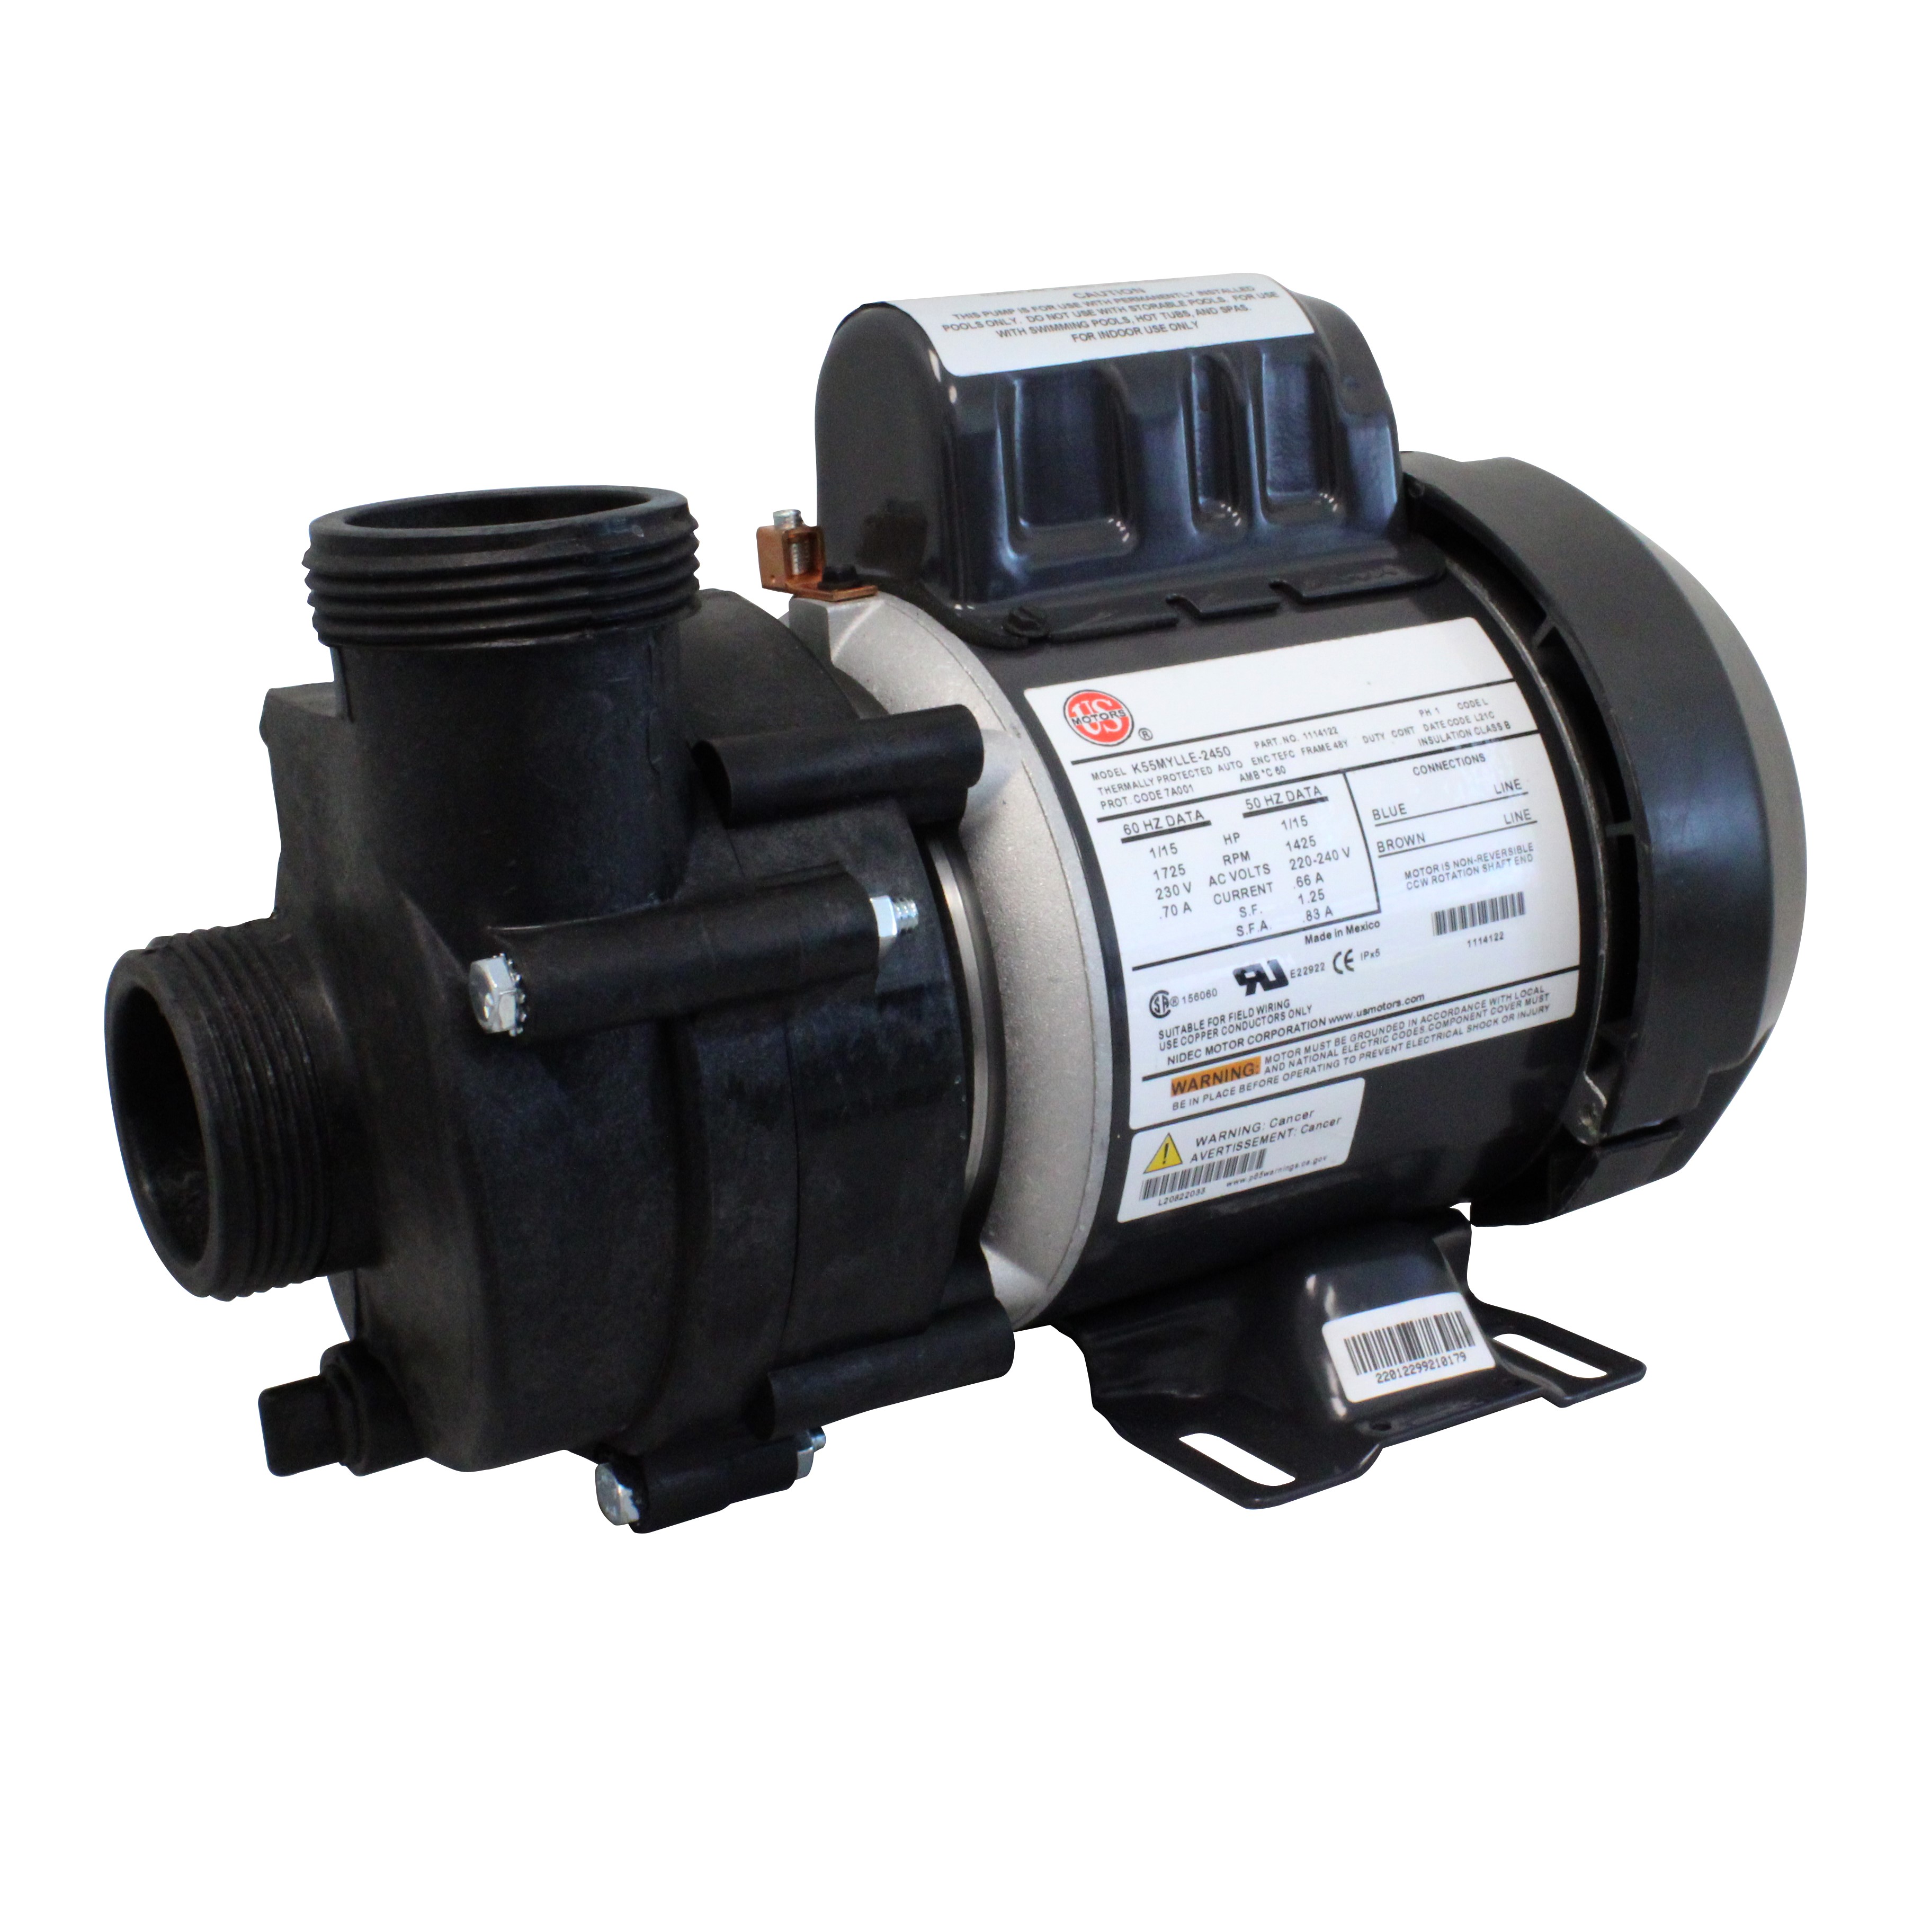 15 amps VAC-15 Variable Speed Pond Pump Control 